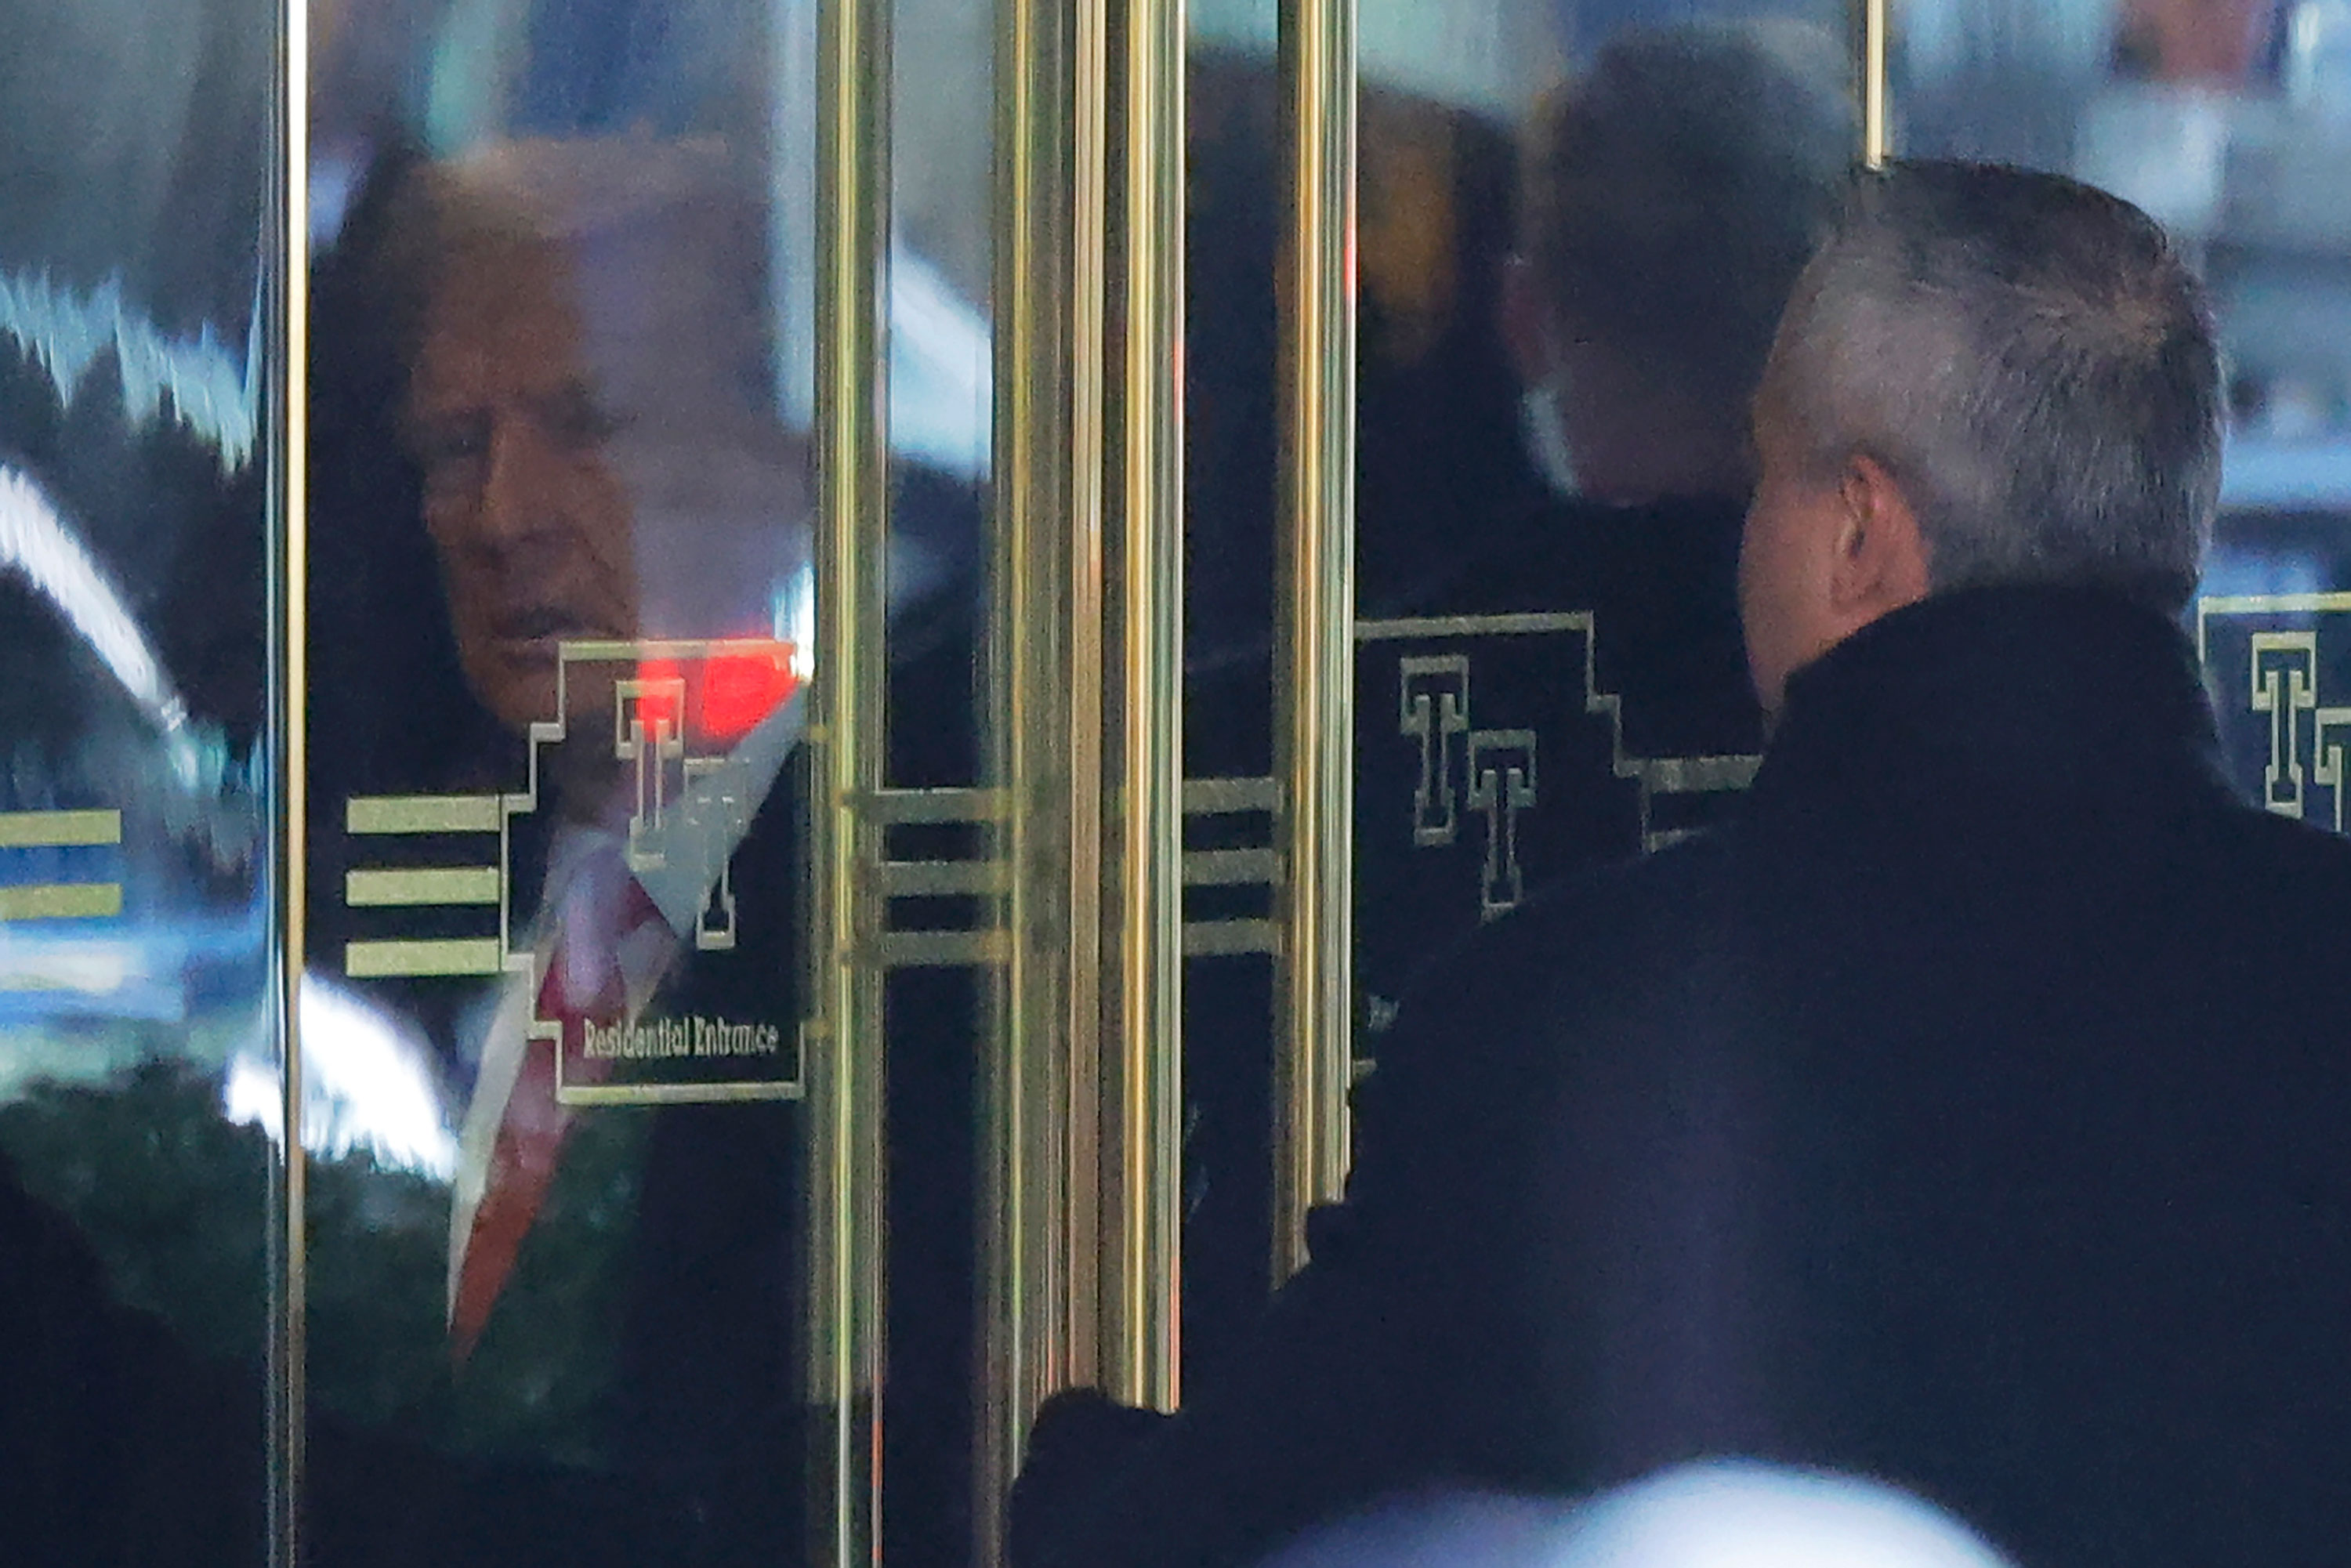 Former President Donald Trump departs Trump Tower in New York for a Manhattan criminal court on Monday morning.